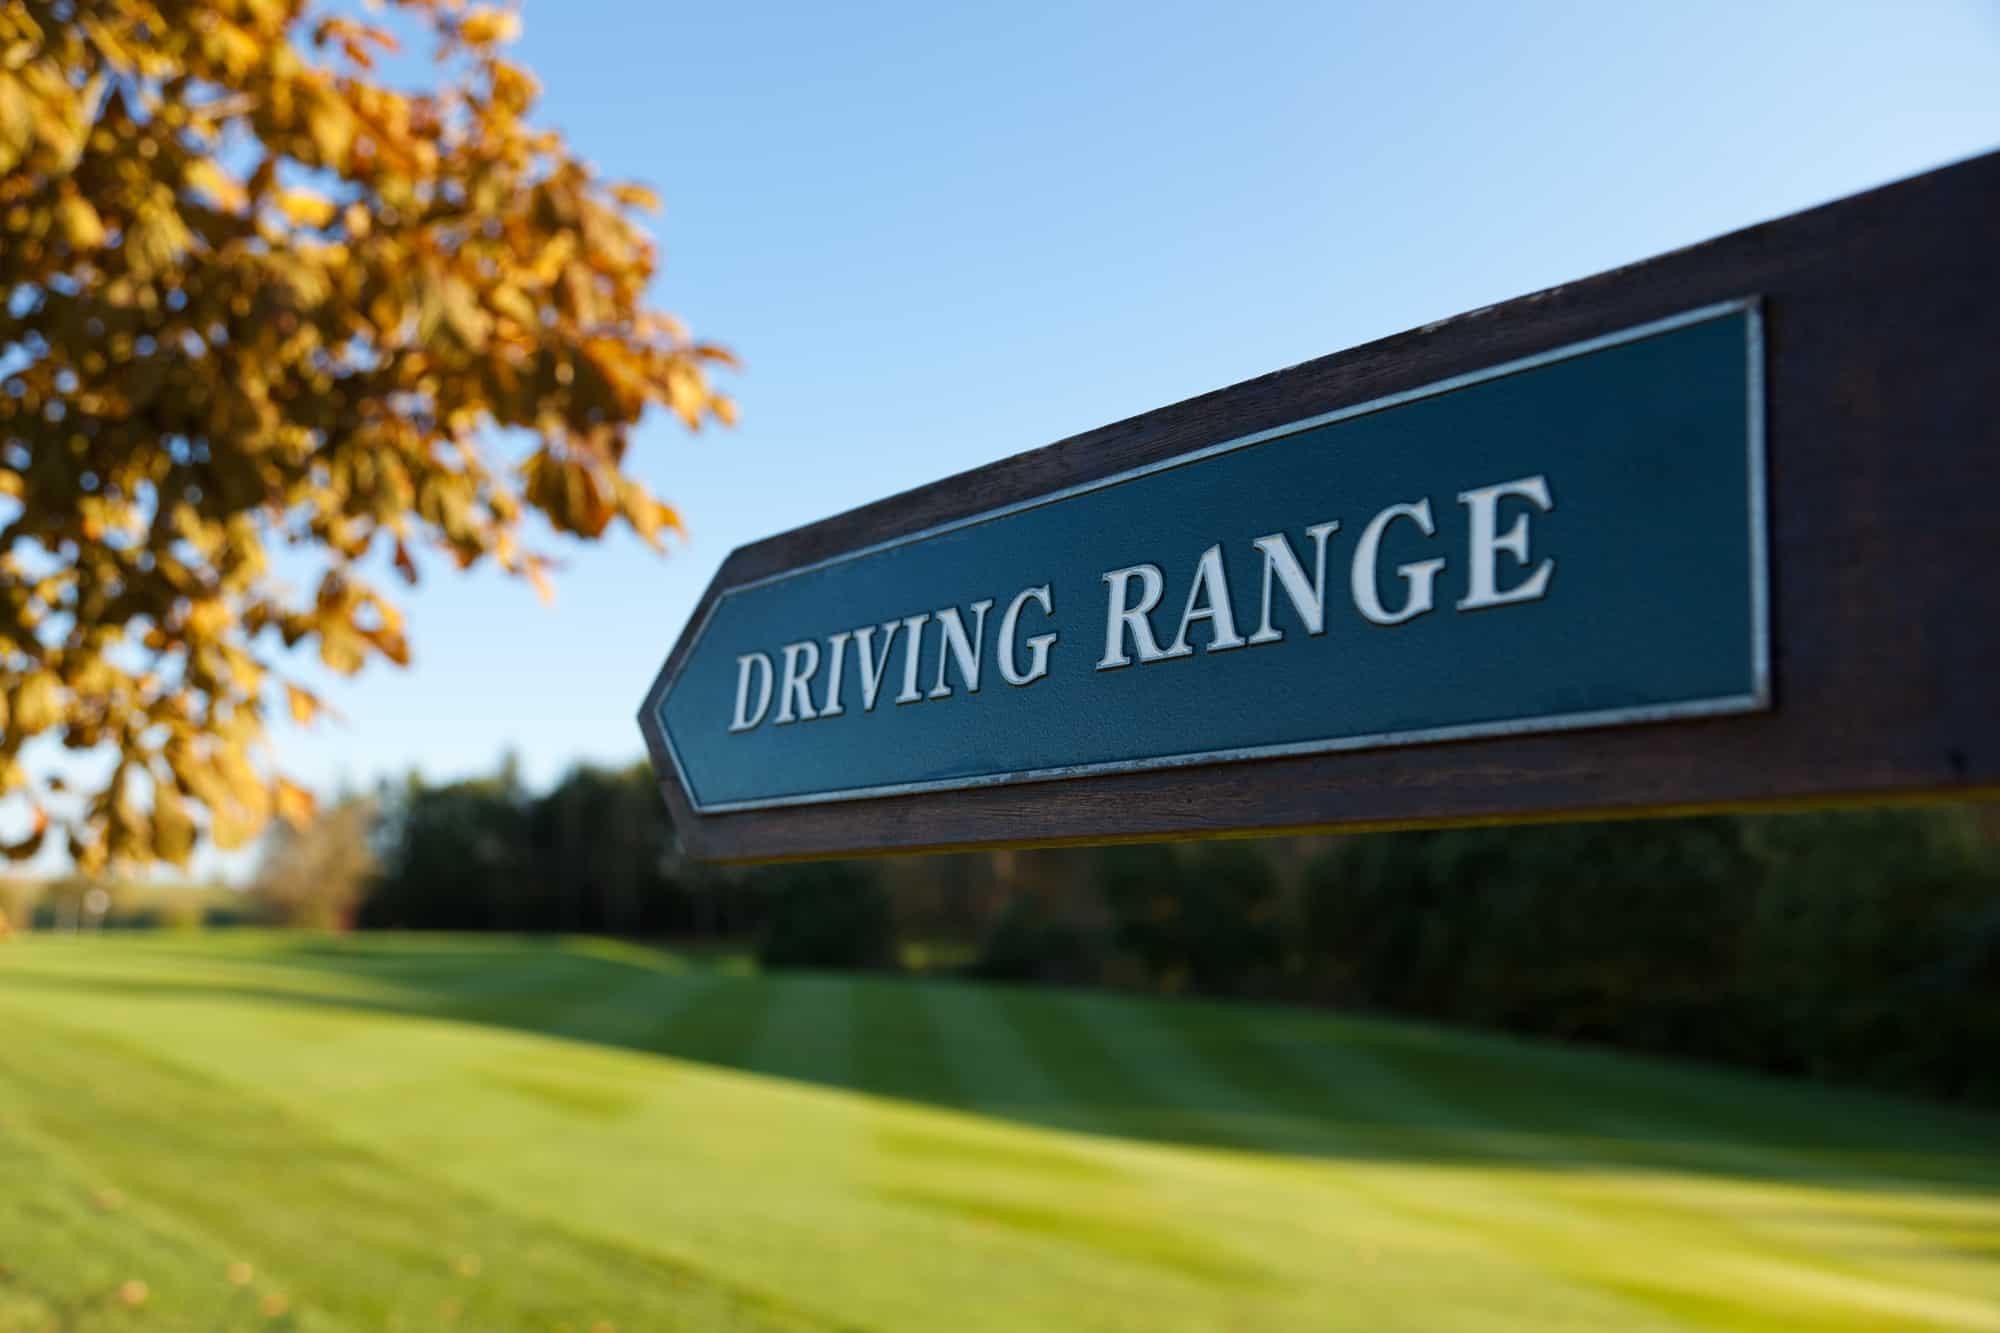 Driving Range direction sign at a golf course